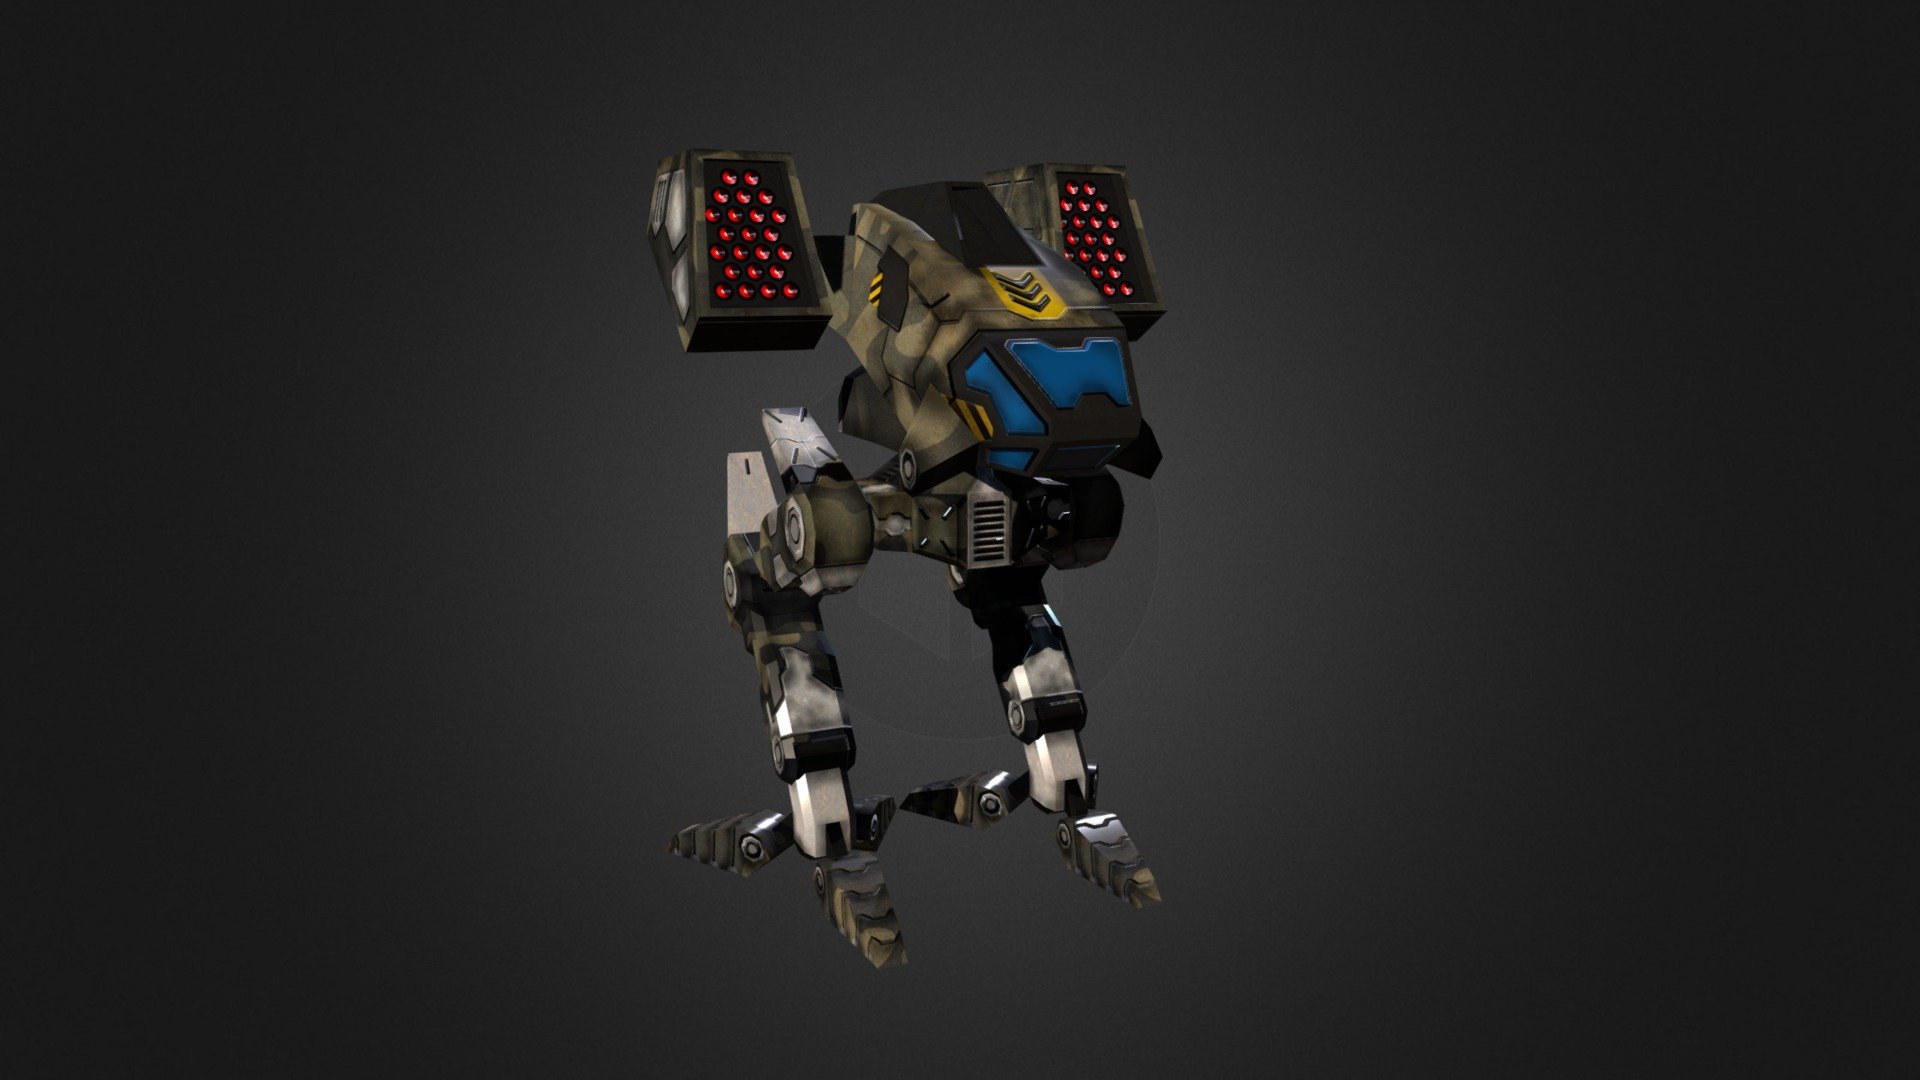 Raptor  is one of my low-poly mech models designed for mobile game. It contains high resolution diffusemap, normalmap and specularmaps. Upon the request, model can be rigged and animated 3d model